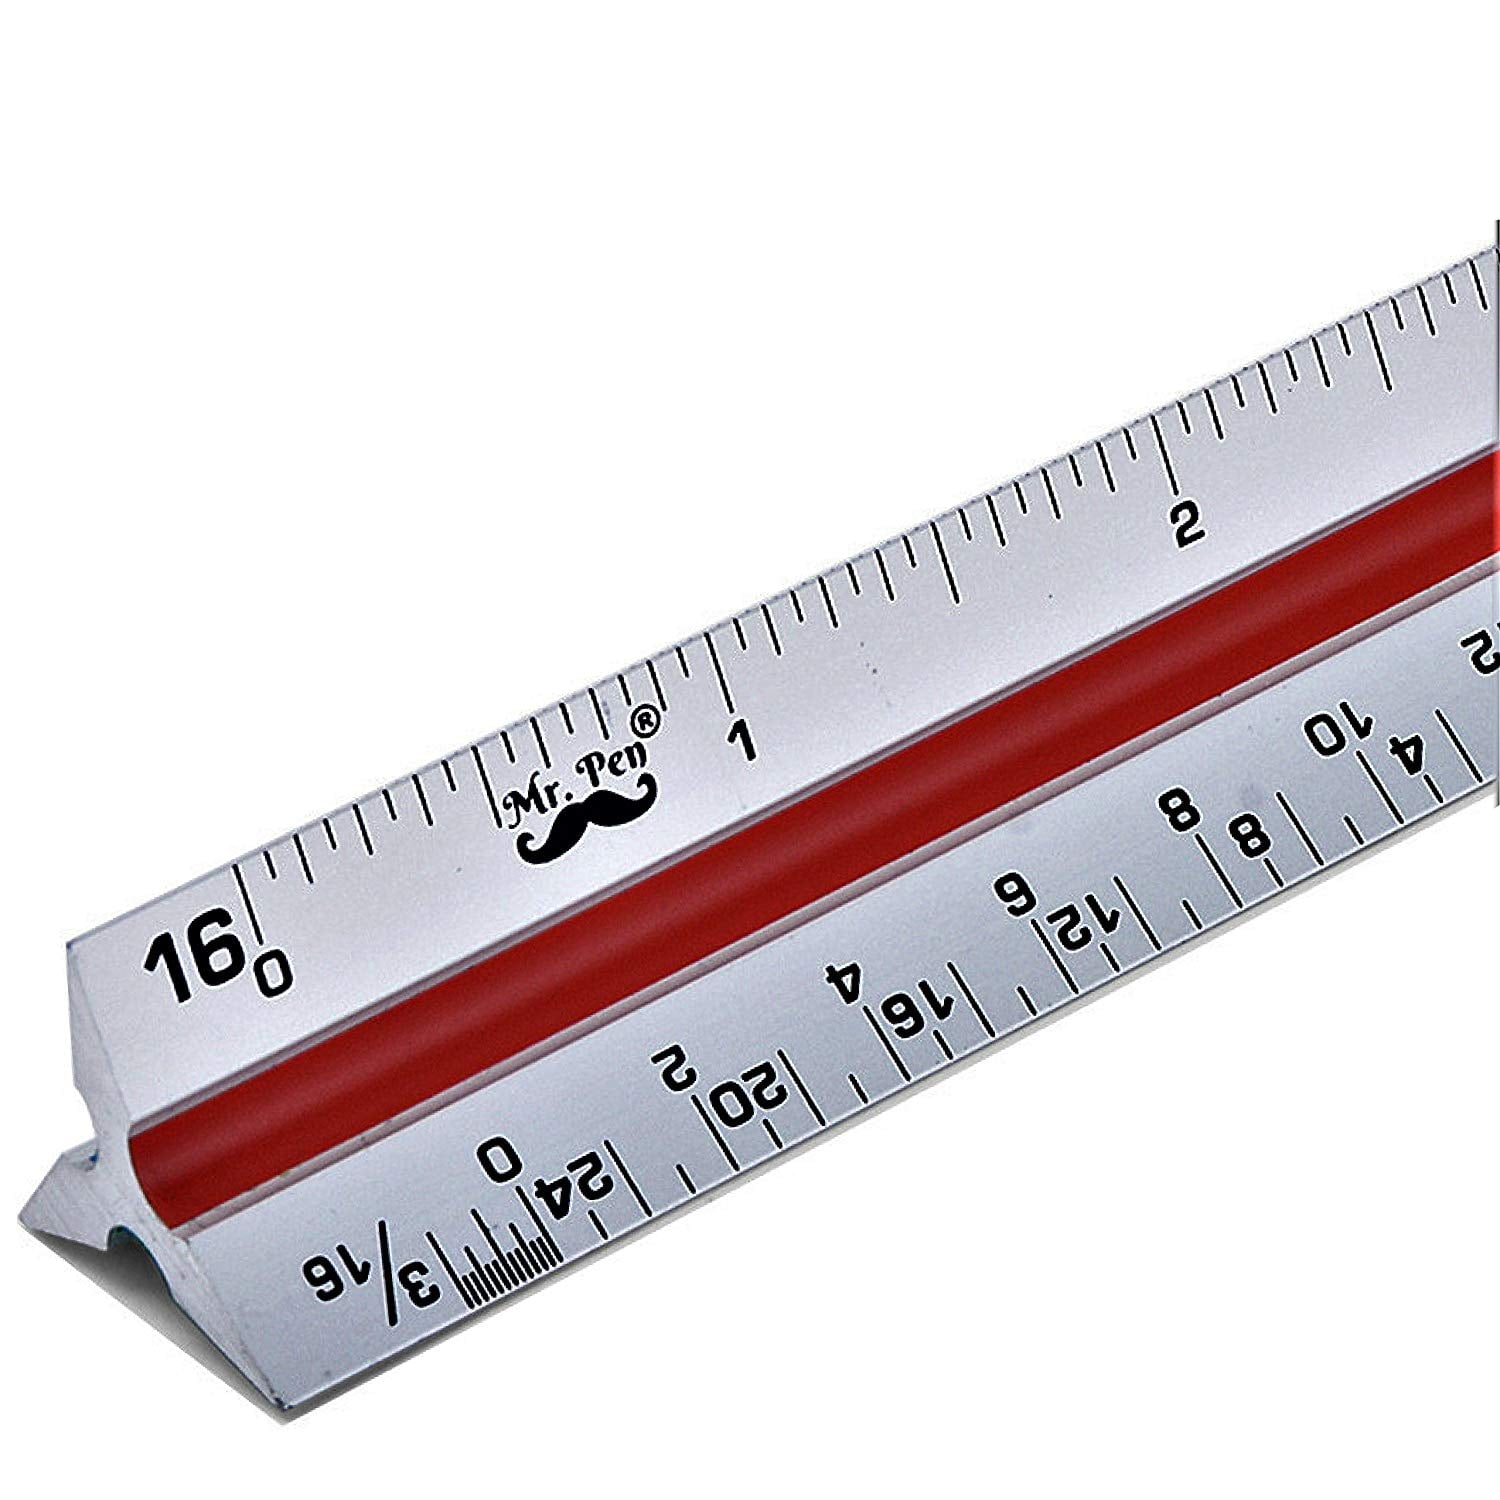 Triangular Architect Scale Ruler Set 12 Inch Imperial Scale Ruler with Stainless Steel Ruler and Metal Compass Architectural Scale Ruler Student Staionery Supplies Measuring Kit for Drafting